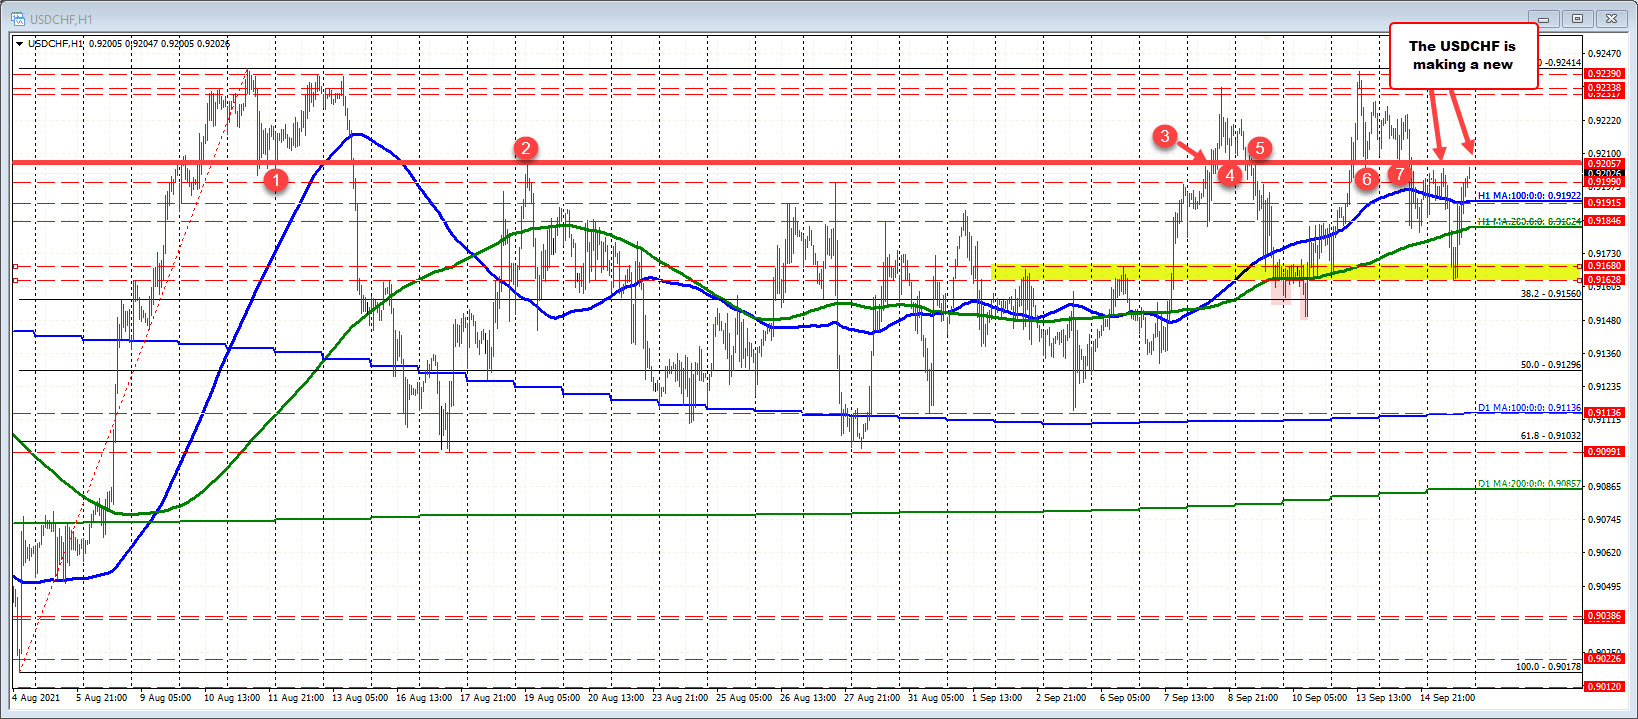 The USDCHF completes the lap down and up today